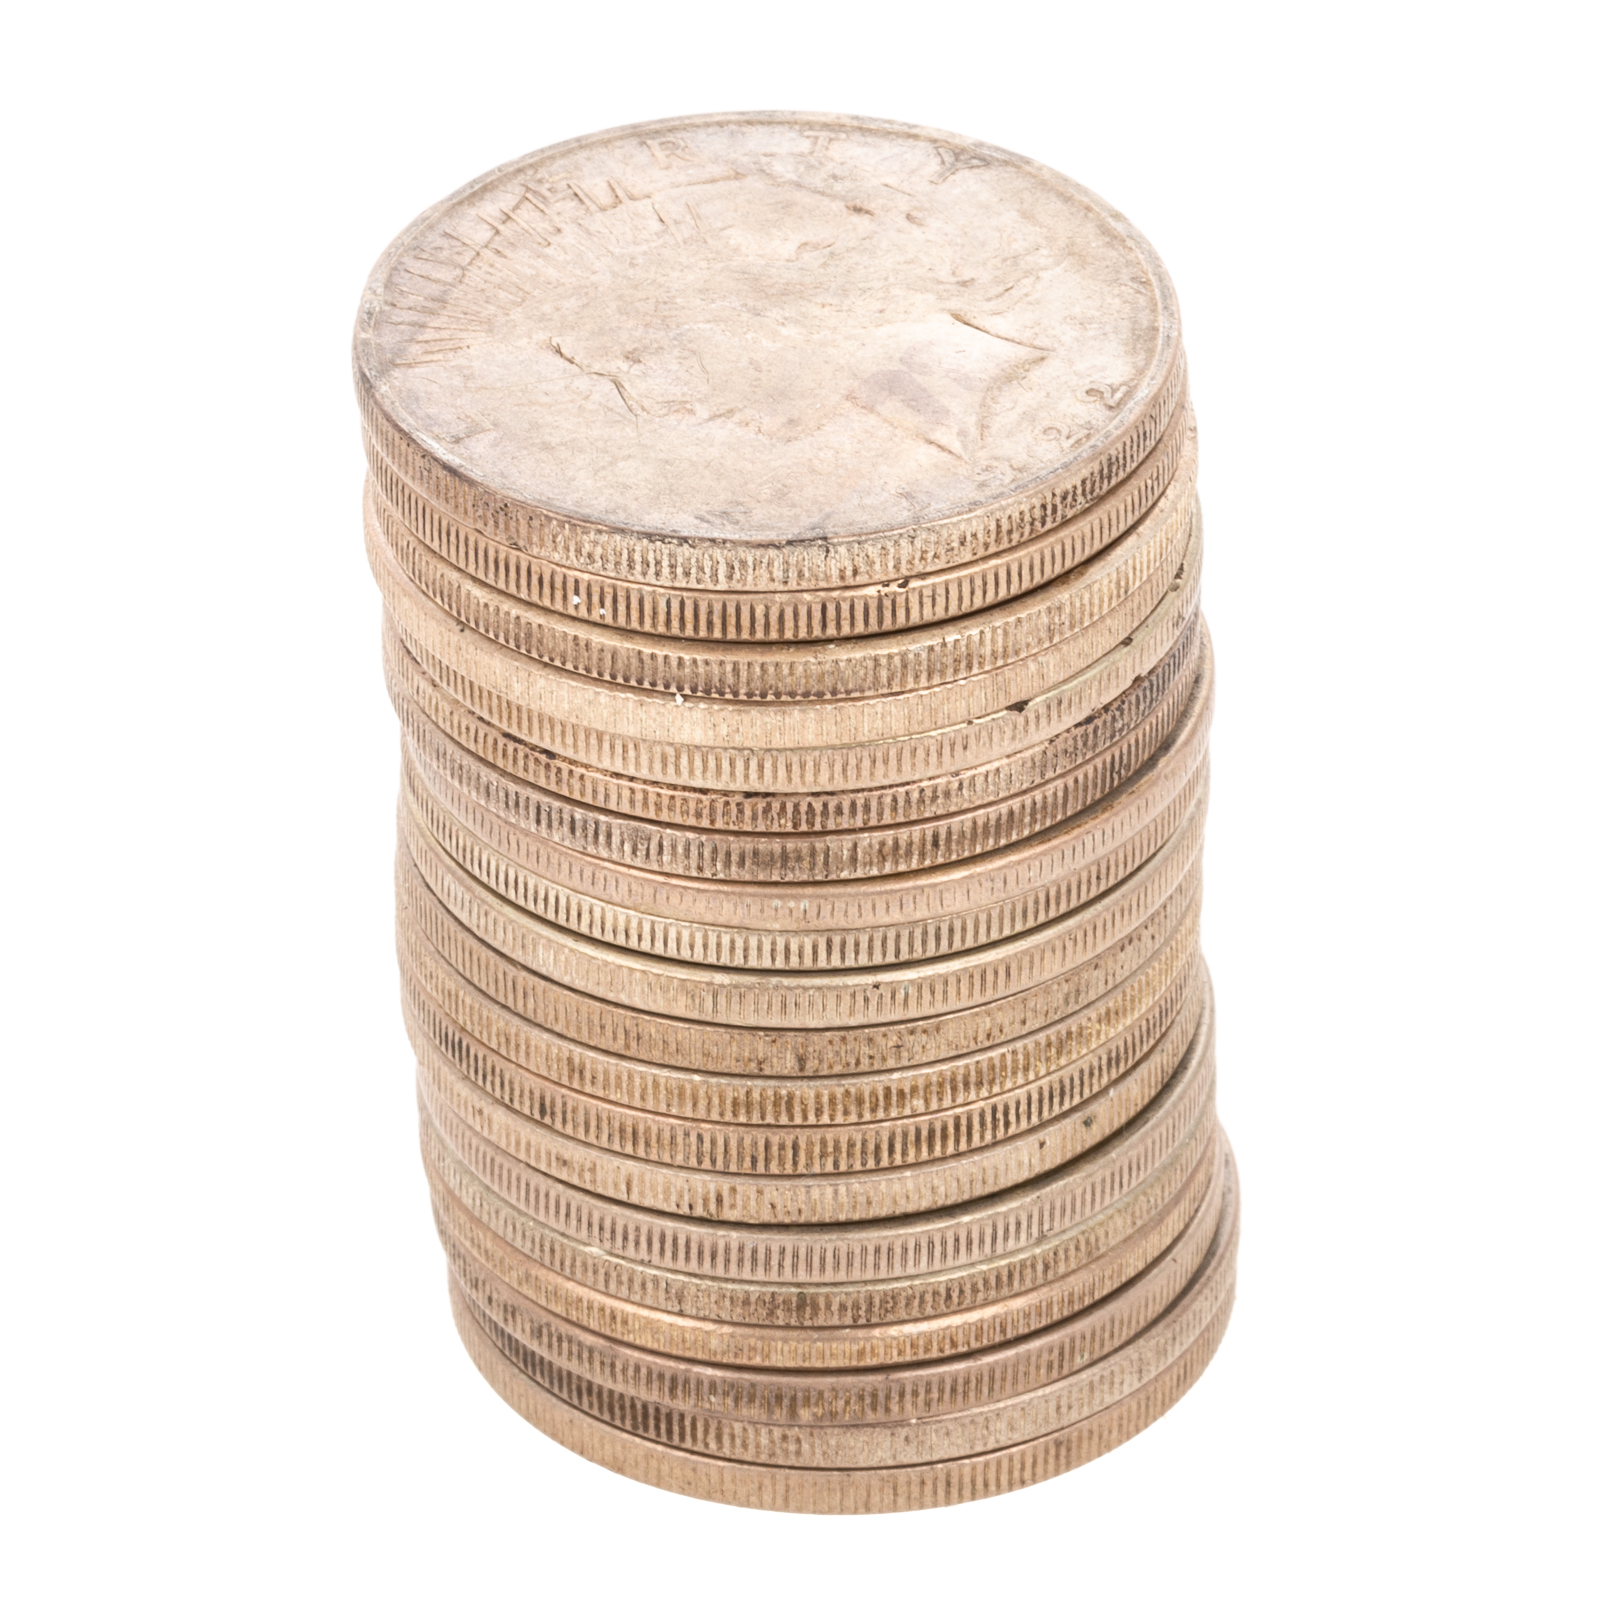 A ROLL OF PEACE DOLLARS WITH REMNANTS